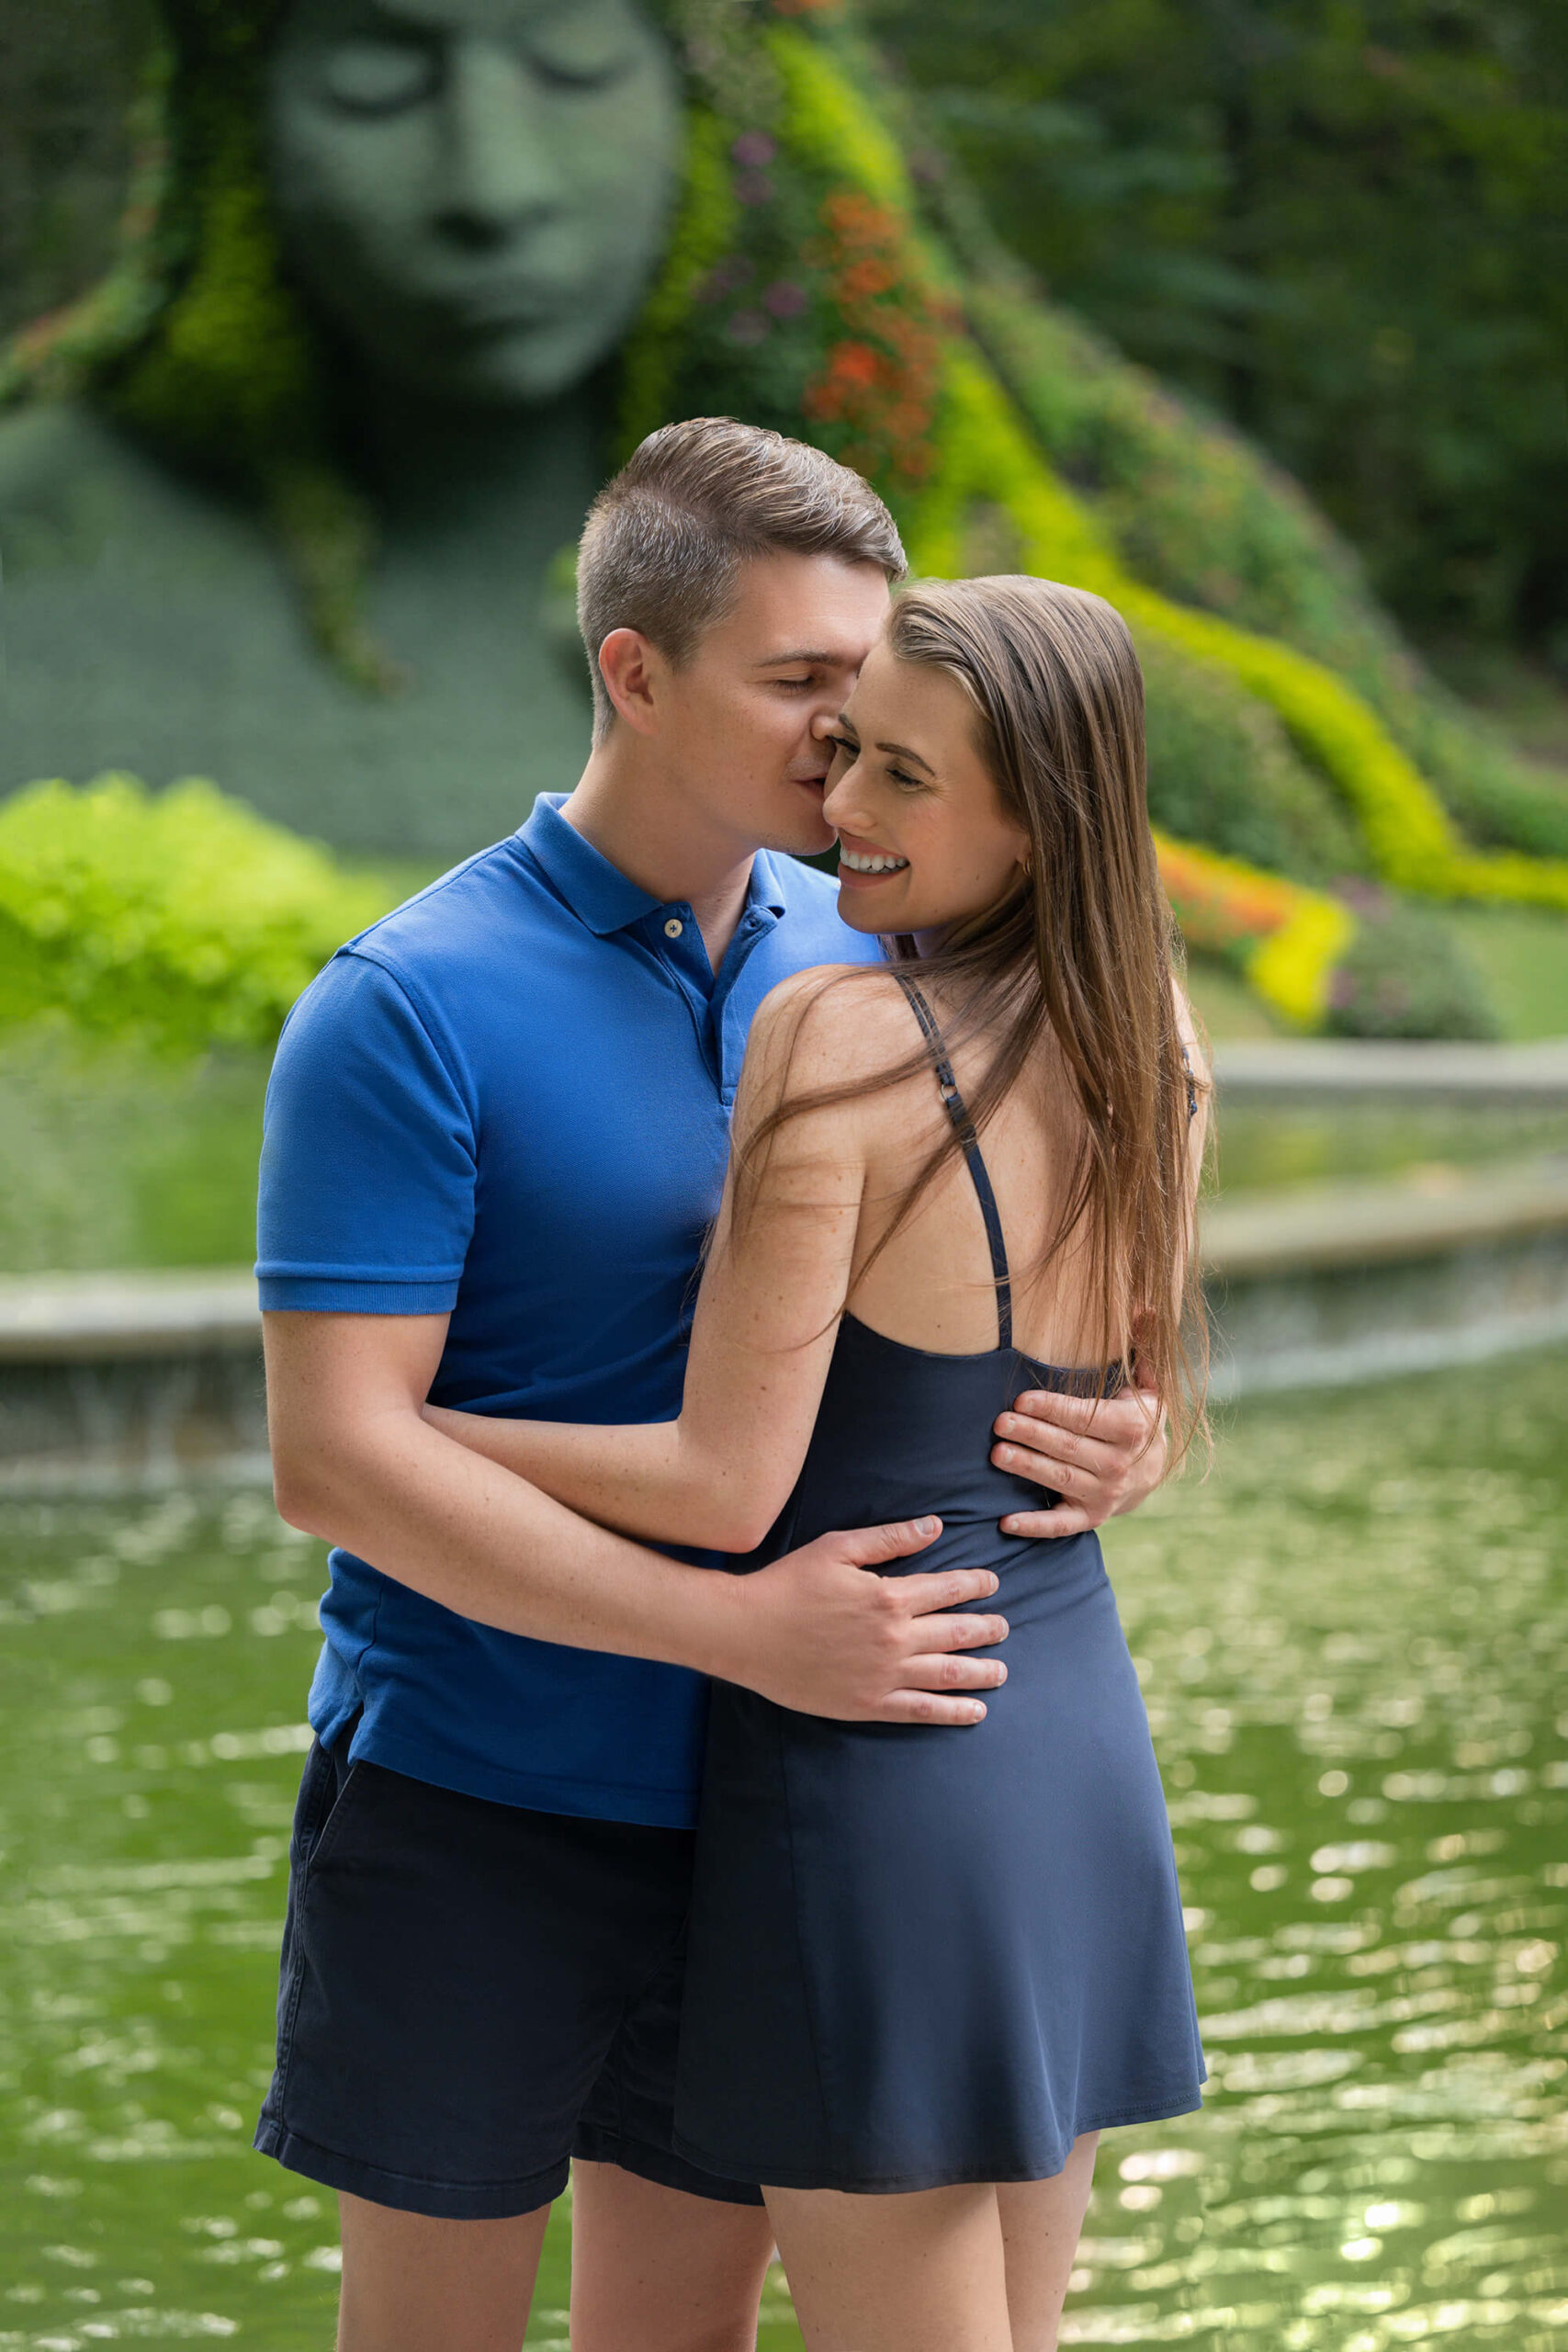 Romantic Engagement Proposal at Atlanta Botanical Gardens: A charming garden setting featuring blooming flowers, winding pathways, and serene water features, providing a picturesque backdrop for a heartfelt marriage proposal filled with love and excitement.